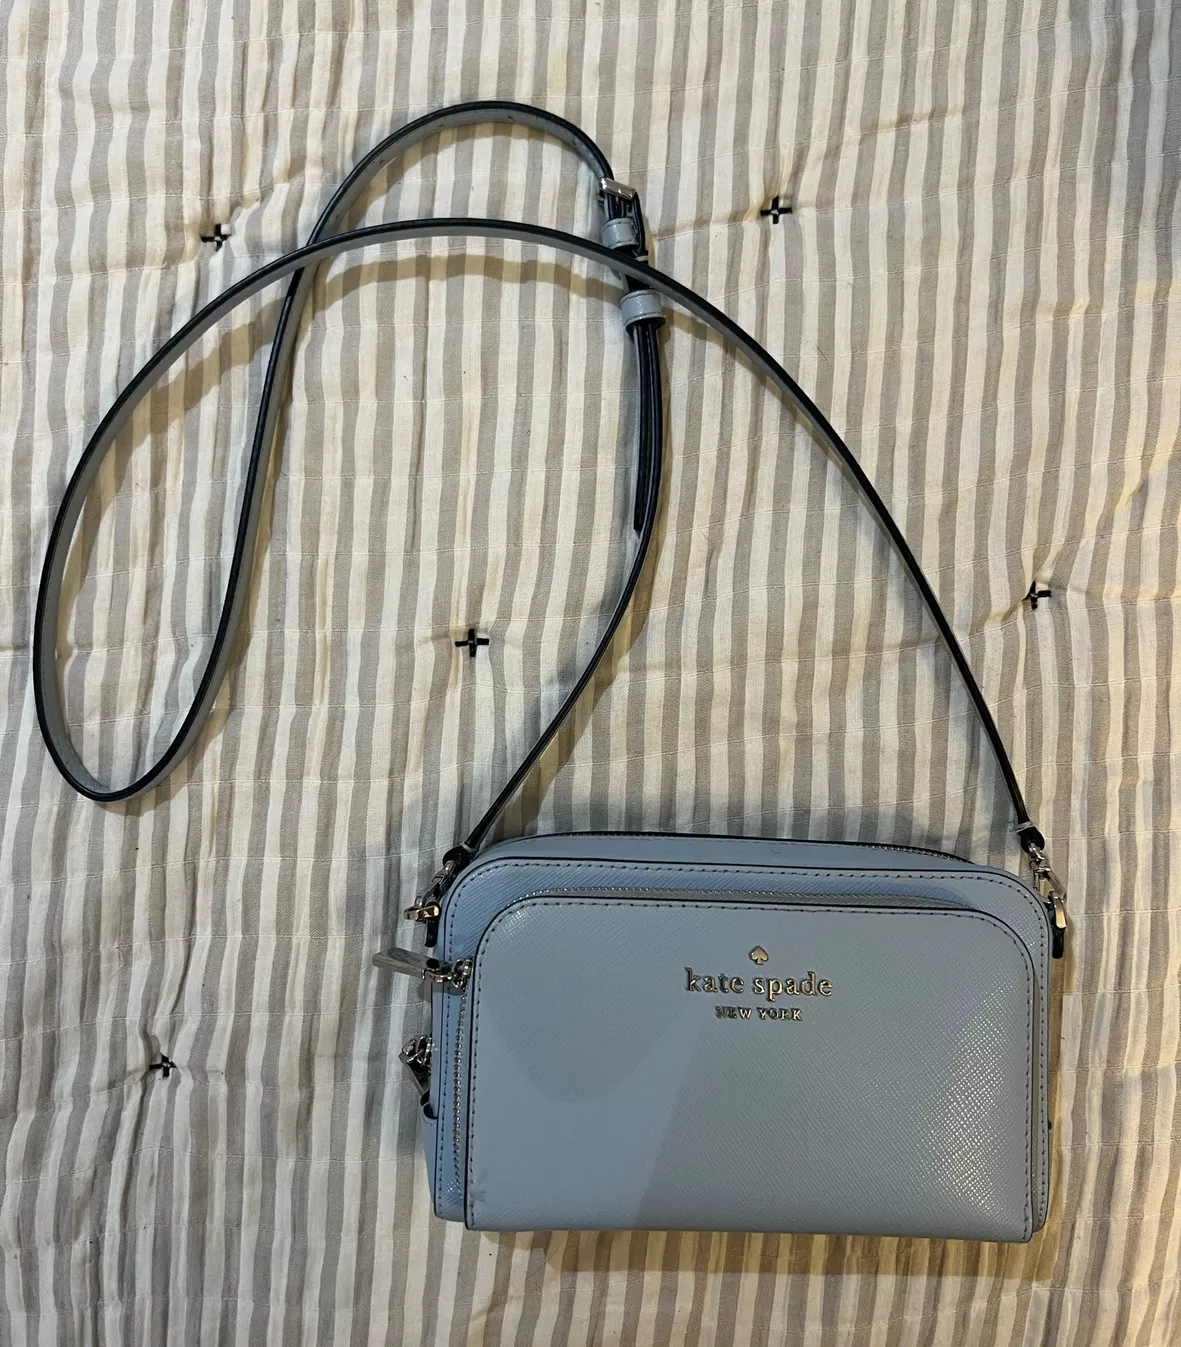 Staci Dual Zip Around Crossbody, Kate Spade Outlet